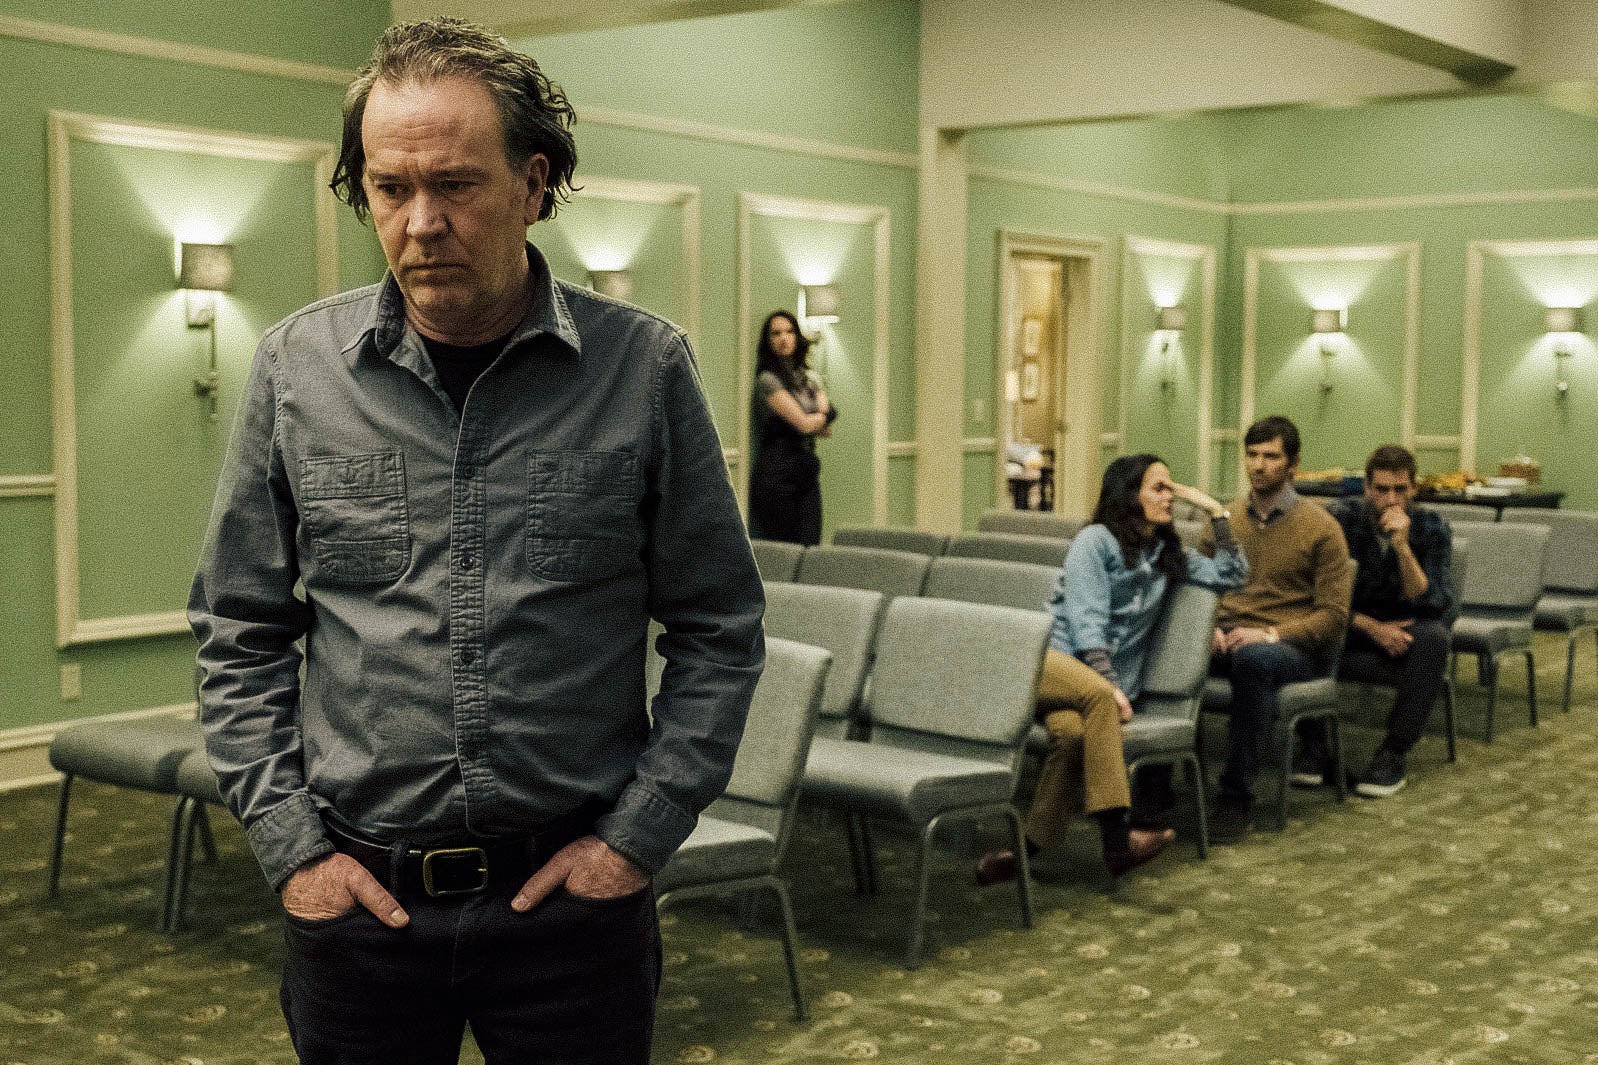 Timothy Hutton stands apart from the rest of his cast family in The Haunting of Hill House.